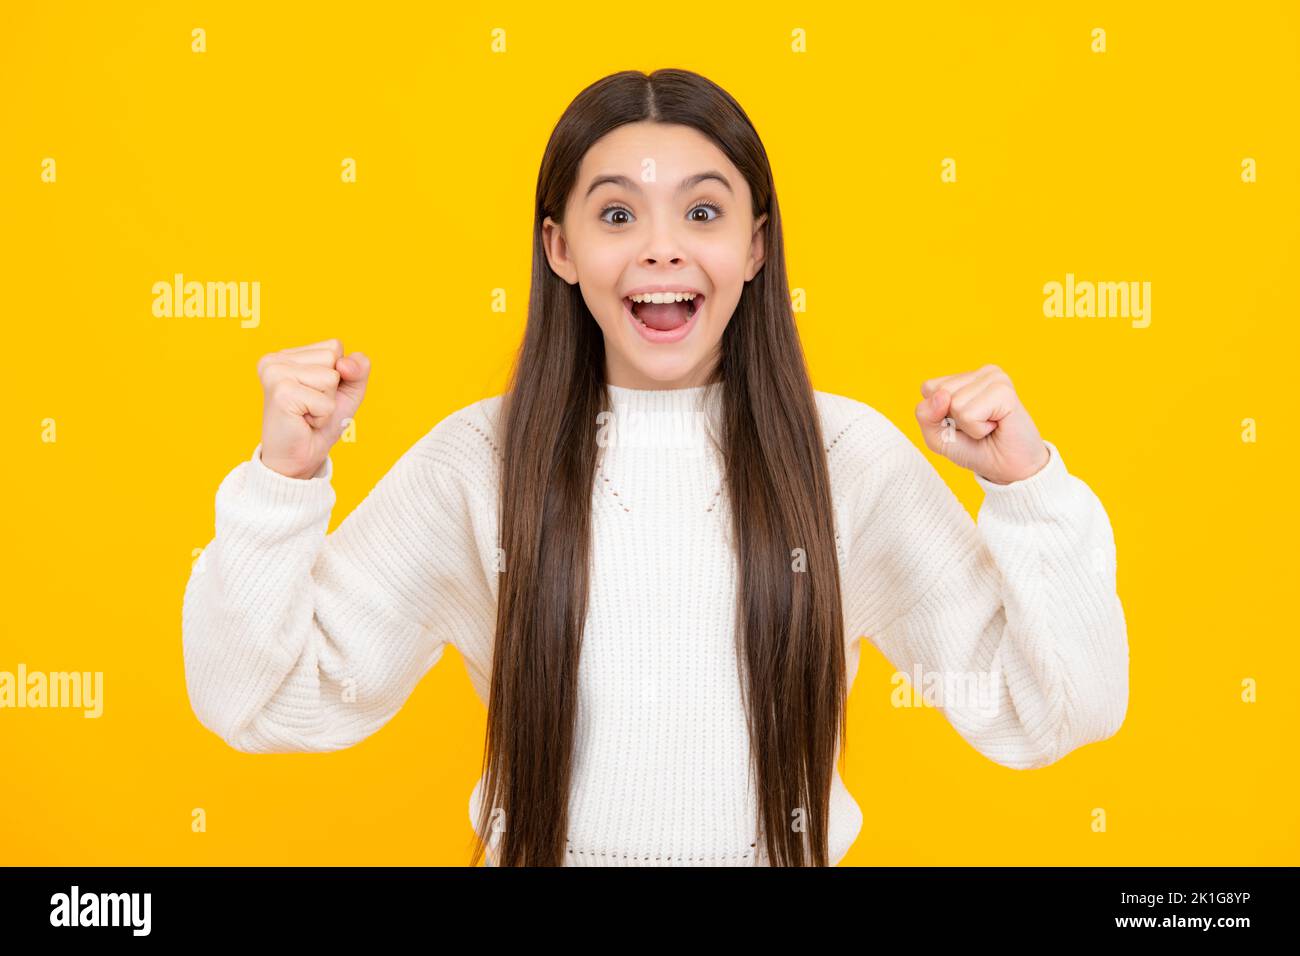 Teenager child girl rejoicing, say yes, looking happy and celebrating victory, champion gesture, fist pump, on yellow background. Stock Photo